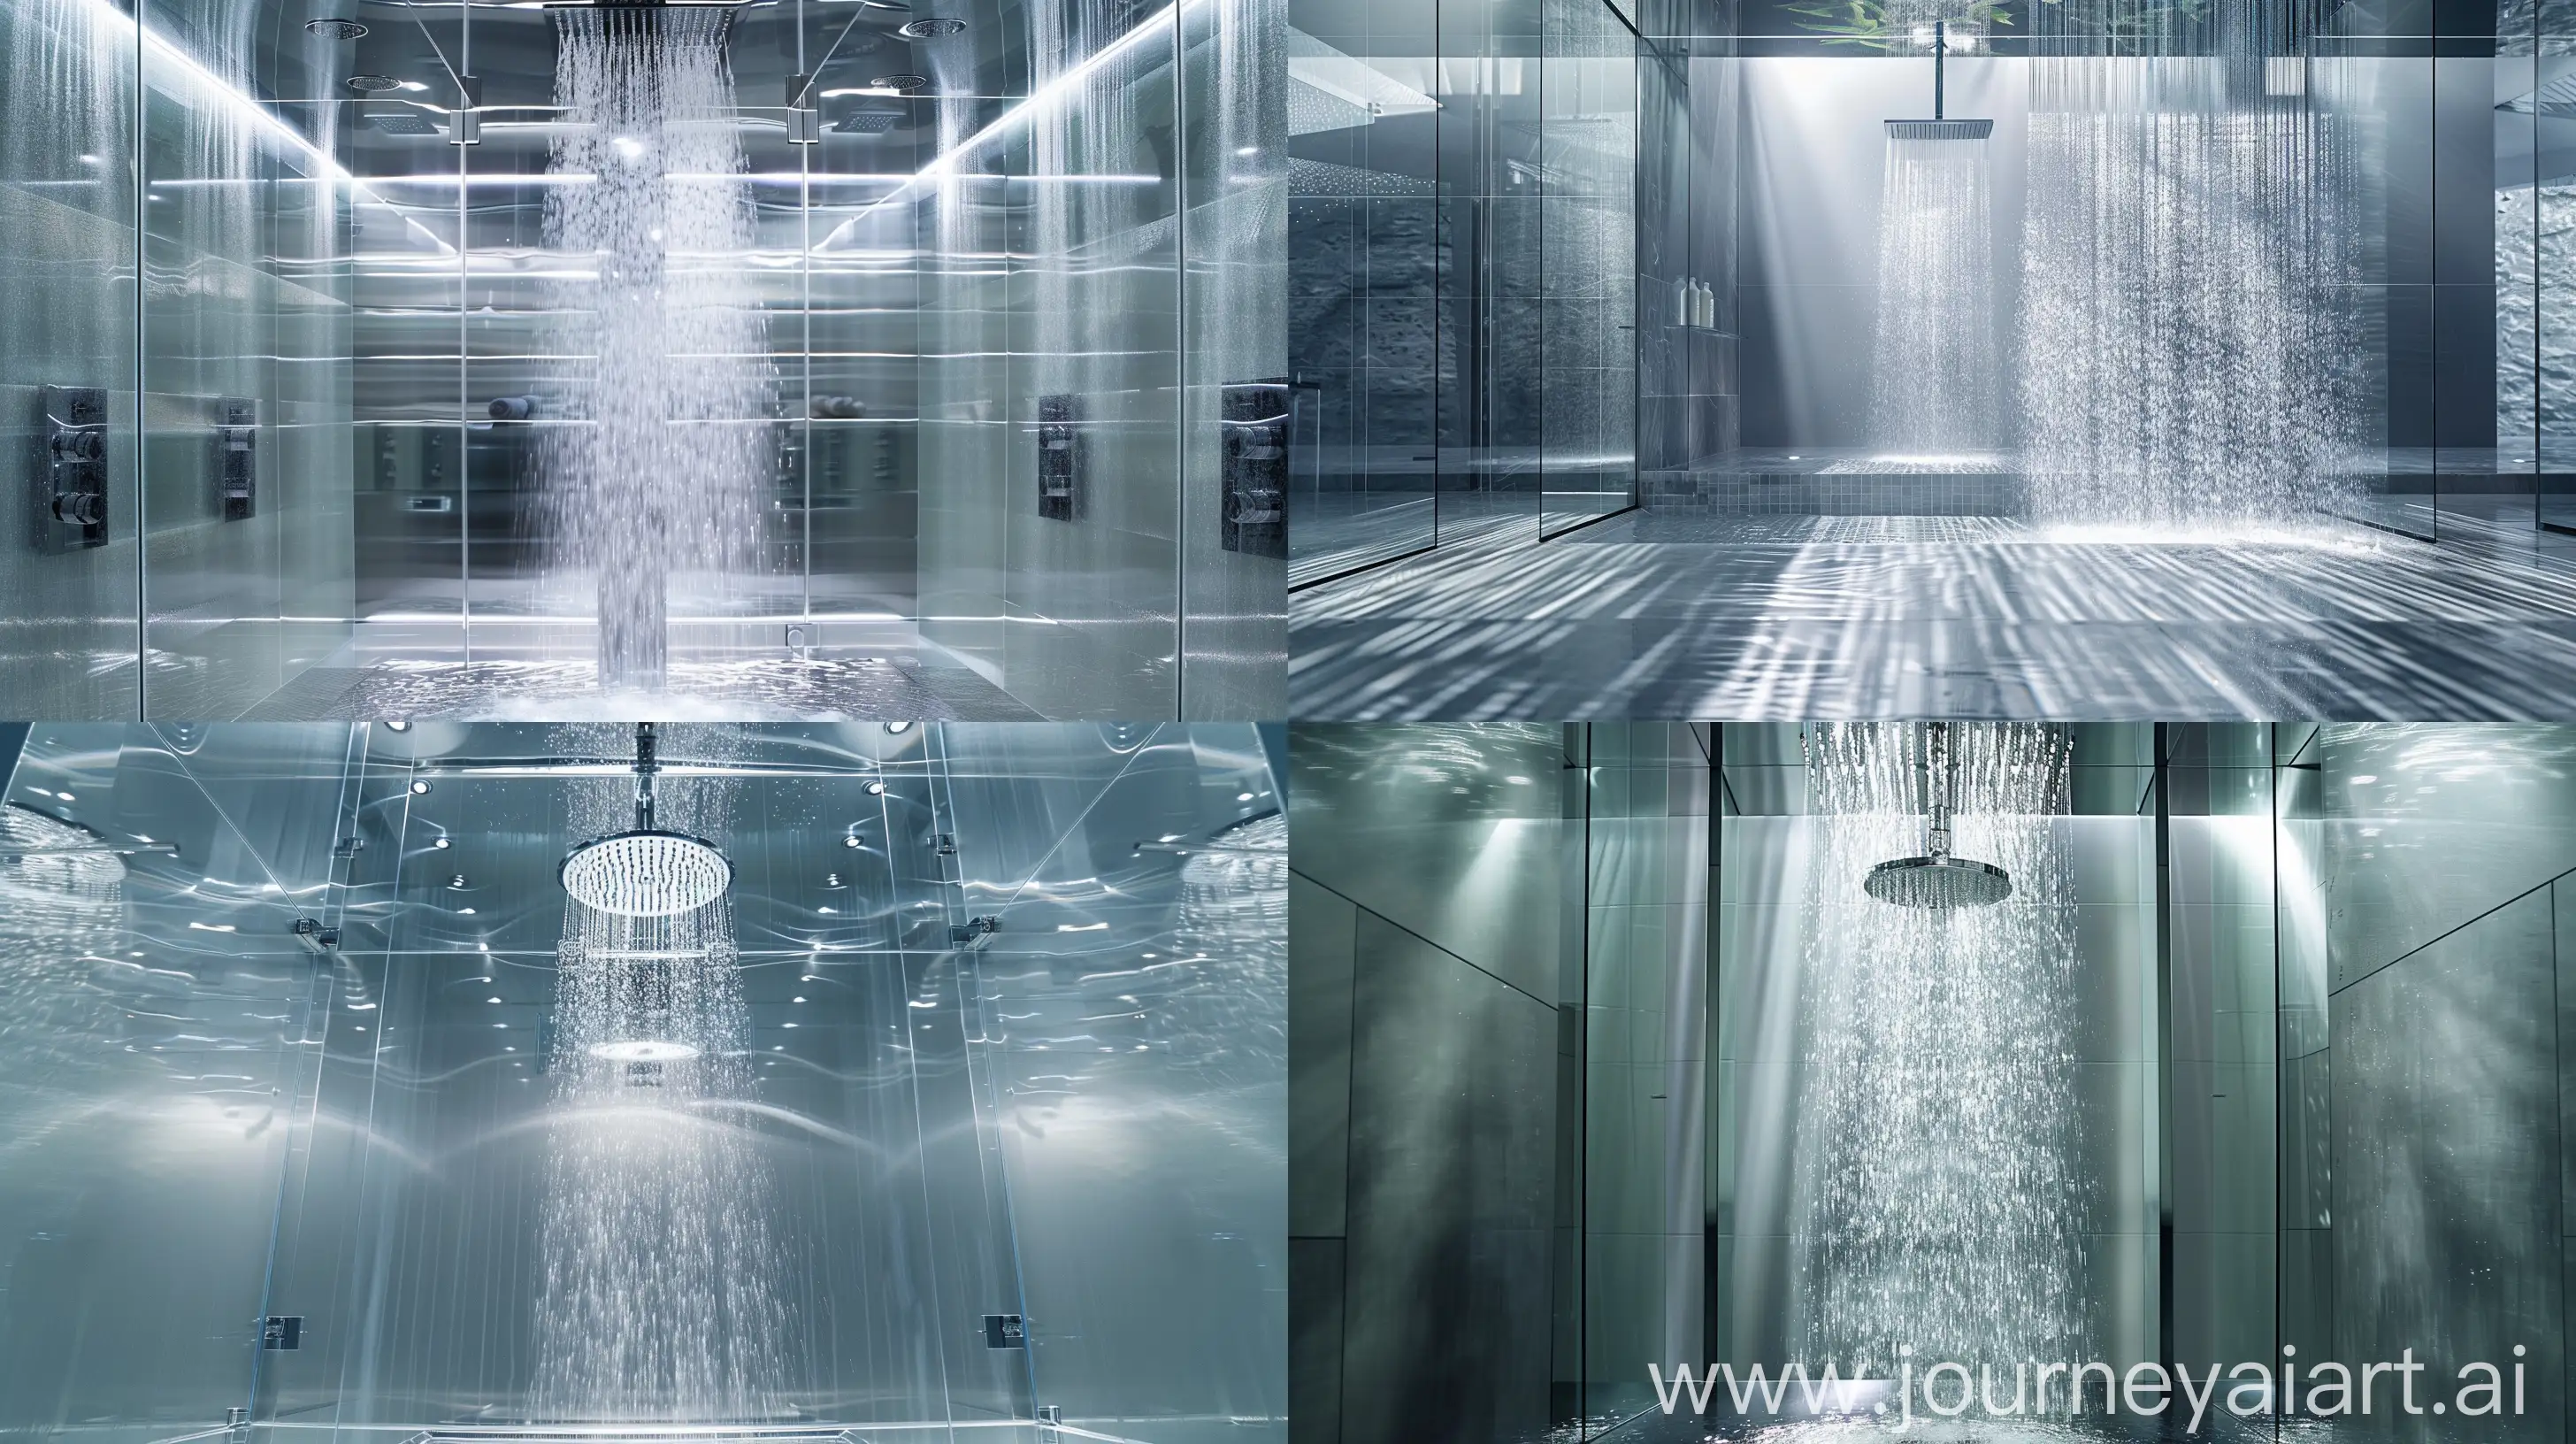 A high-resolution photograph capturing a modern shower cabin with a tropical rain shower head. The sleek design of the cabin features transparent tempered glass walls and chrome fixtures. The tropical shower head, positioned centrally, emits a refreshing cascade of water, creating a luxurious spa-like experience. The image showcases the advantages of combined bath and shower units, including convenience, space-saving design, and a wide range of functional capabilities. The clean, minimalist composition emphasizes the functionality and elegance of the shower cabin, while the play of light and water adds a sense of relaxation and tranquility to the scene.  --ar 16:9 